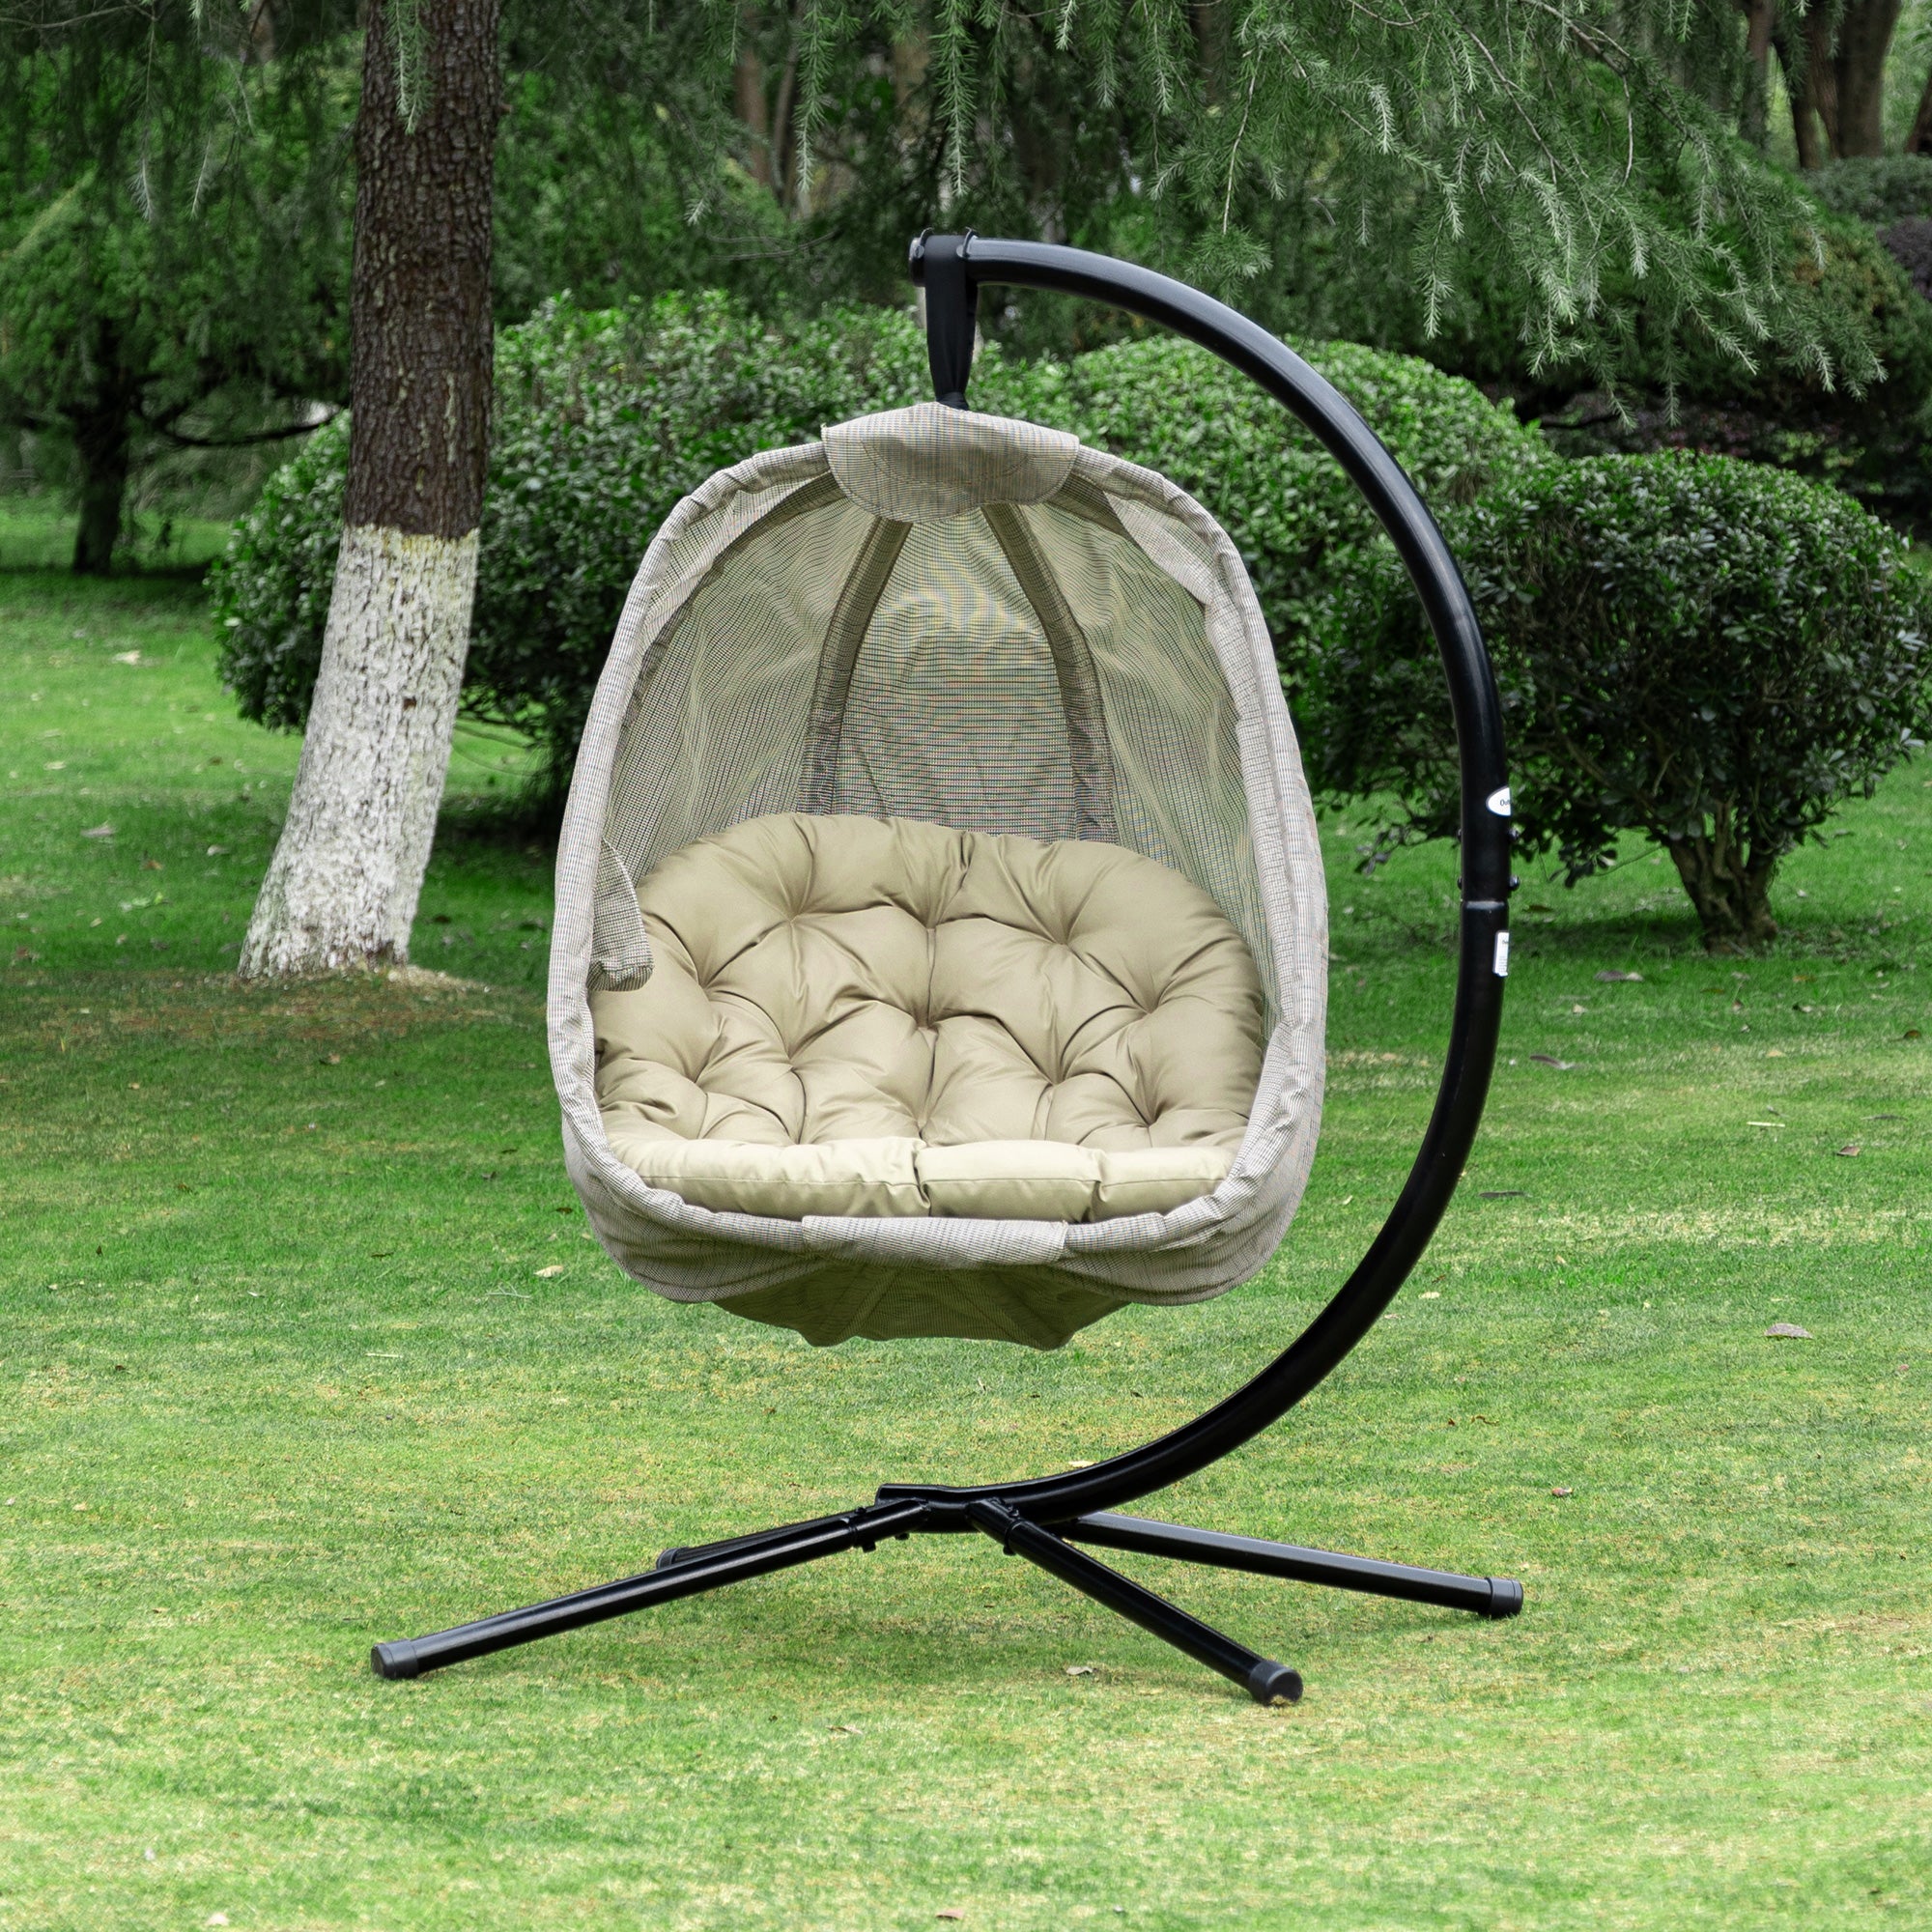 Outsunny Hanging Egg Chair, Folding Swing Hammock with Cushion and Stand for Indoor Outdoor, Patio Garden Furniture, Khaki